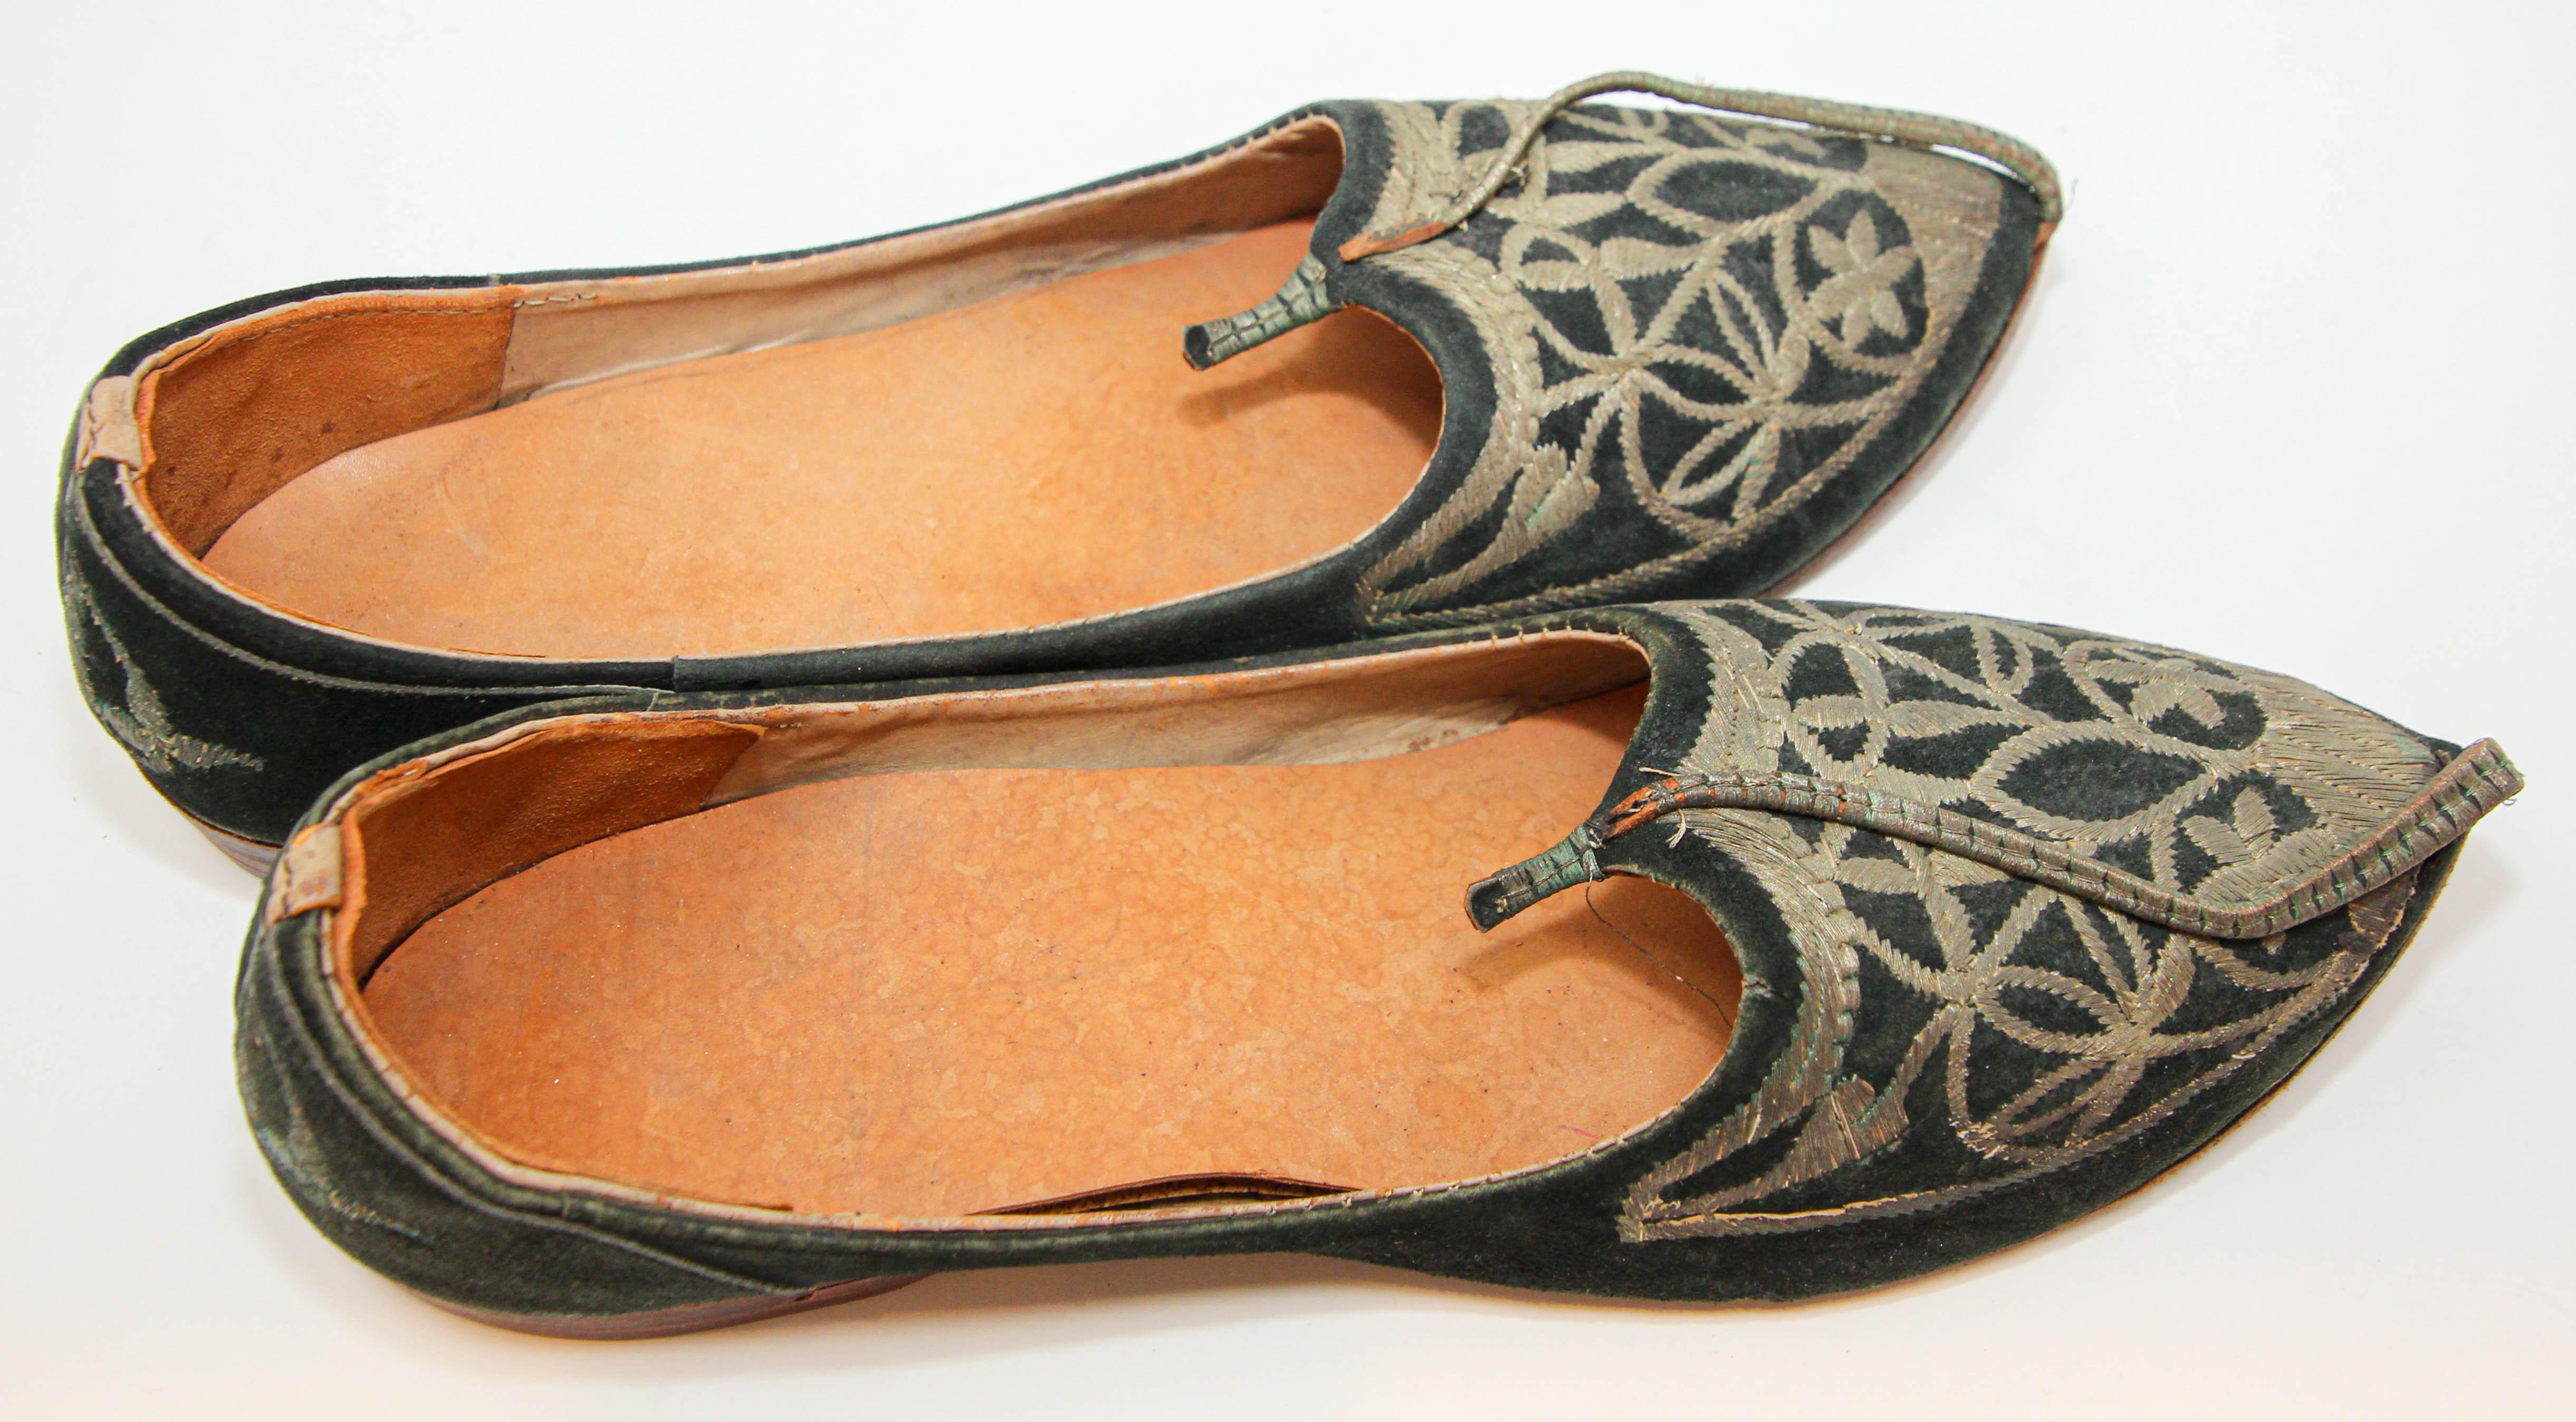 Moorish Mughal style Curled Toe Black Leather Shoes from Tony Duquette Estate For Sale 3